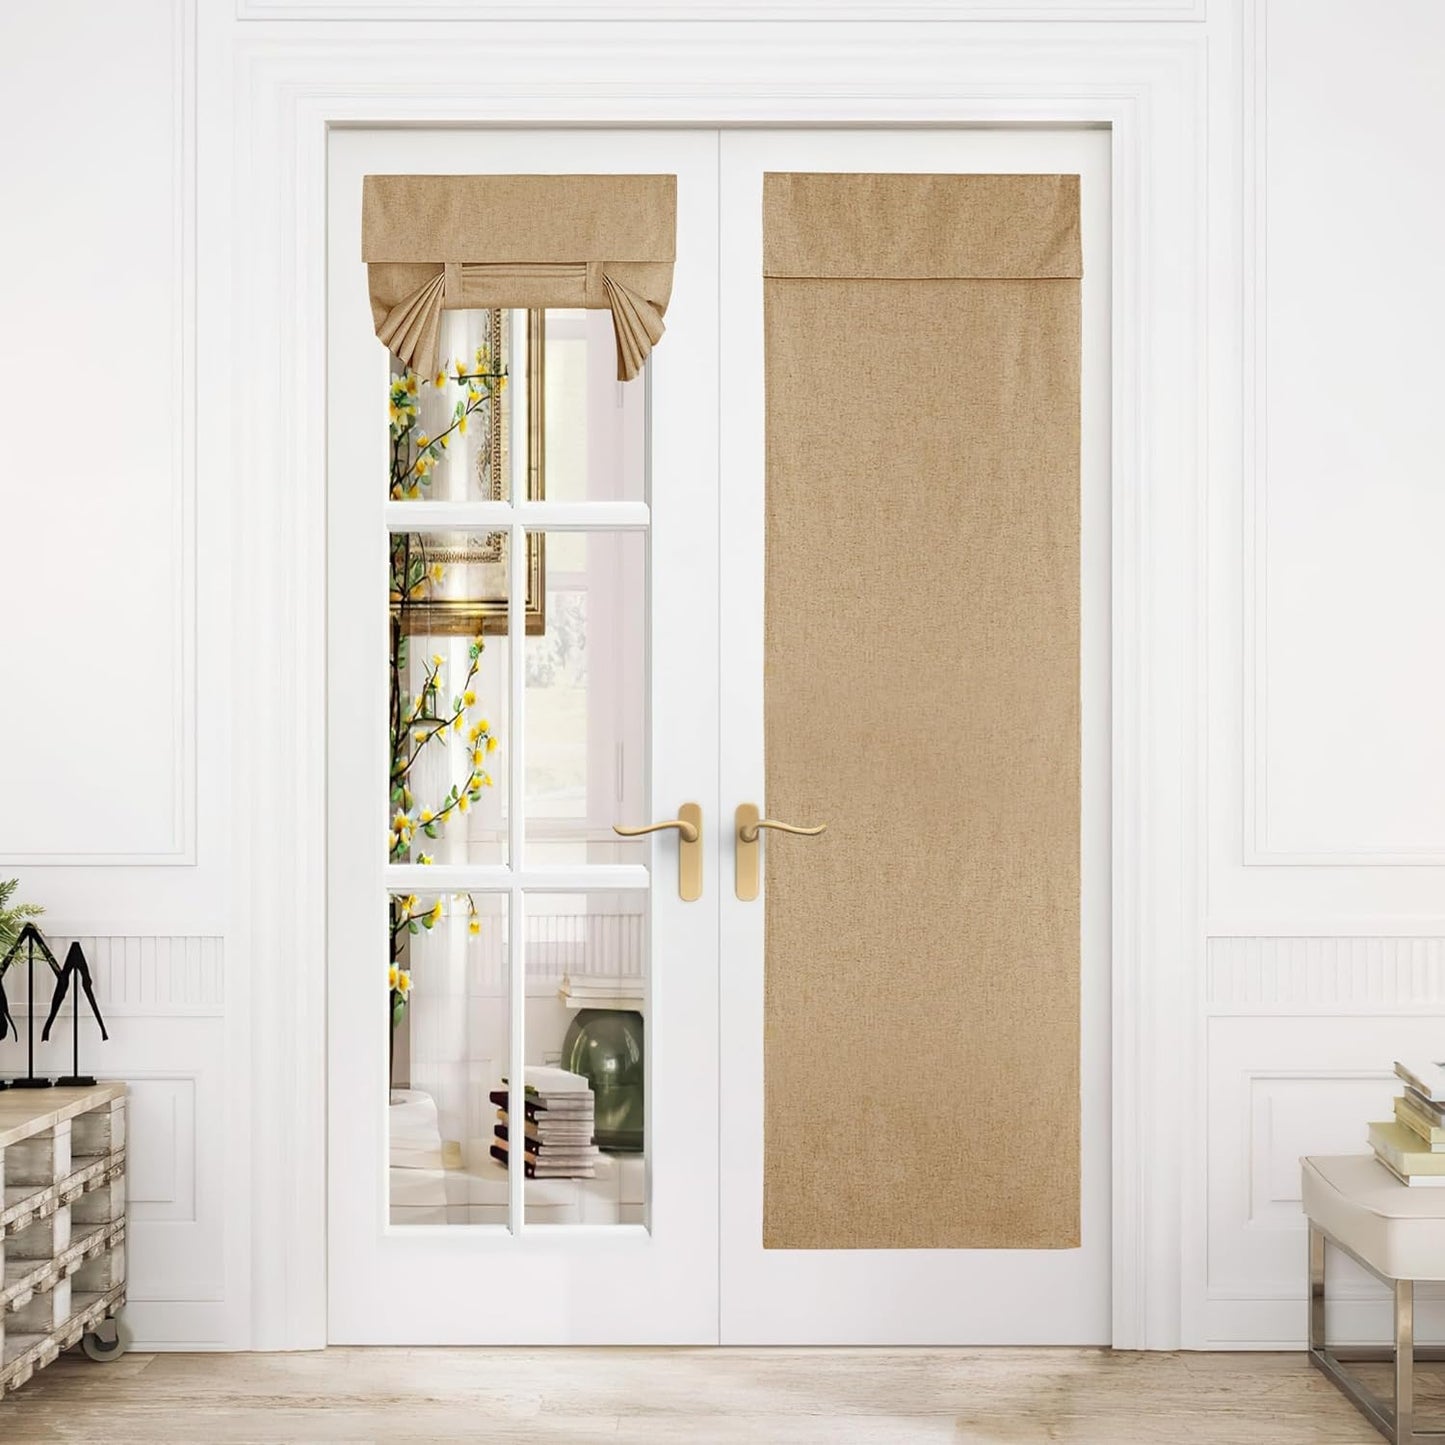 NICETOWN Linen Door Curtain for Door Window, Farmhouse French Door Curtain Shade for Kitchen Bathroom Energy Saving 100% Blackout Tie up Shade for Patio Sliding Glass, 1 Panel, Natural, 26" W X 72" L  NICETOWN Camel W26 X L72 